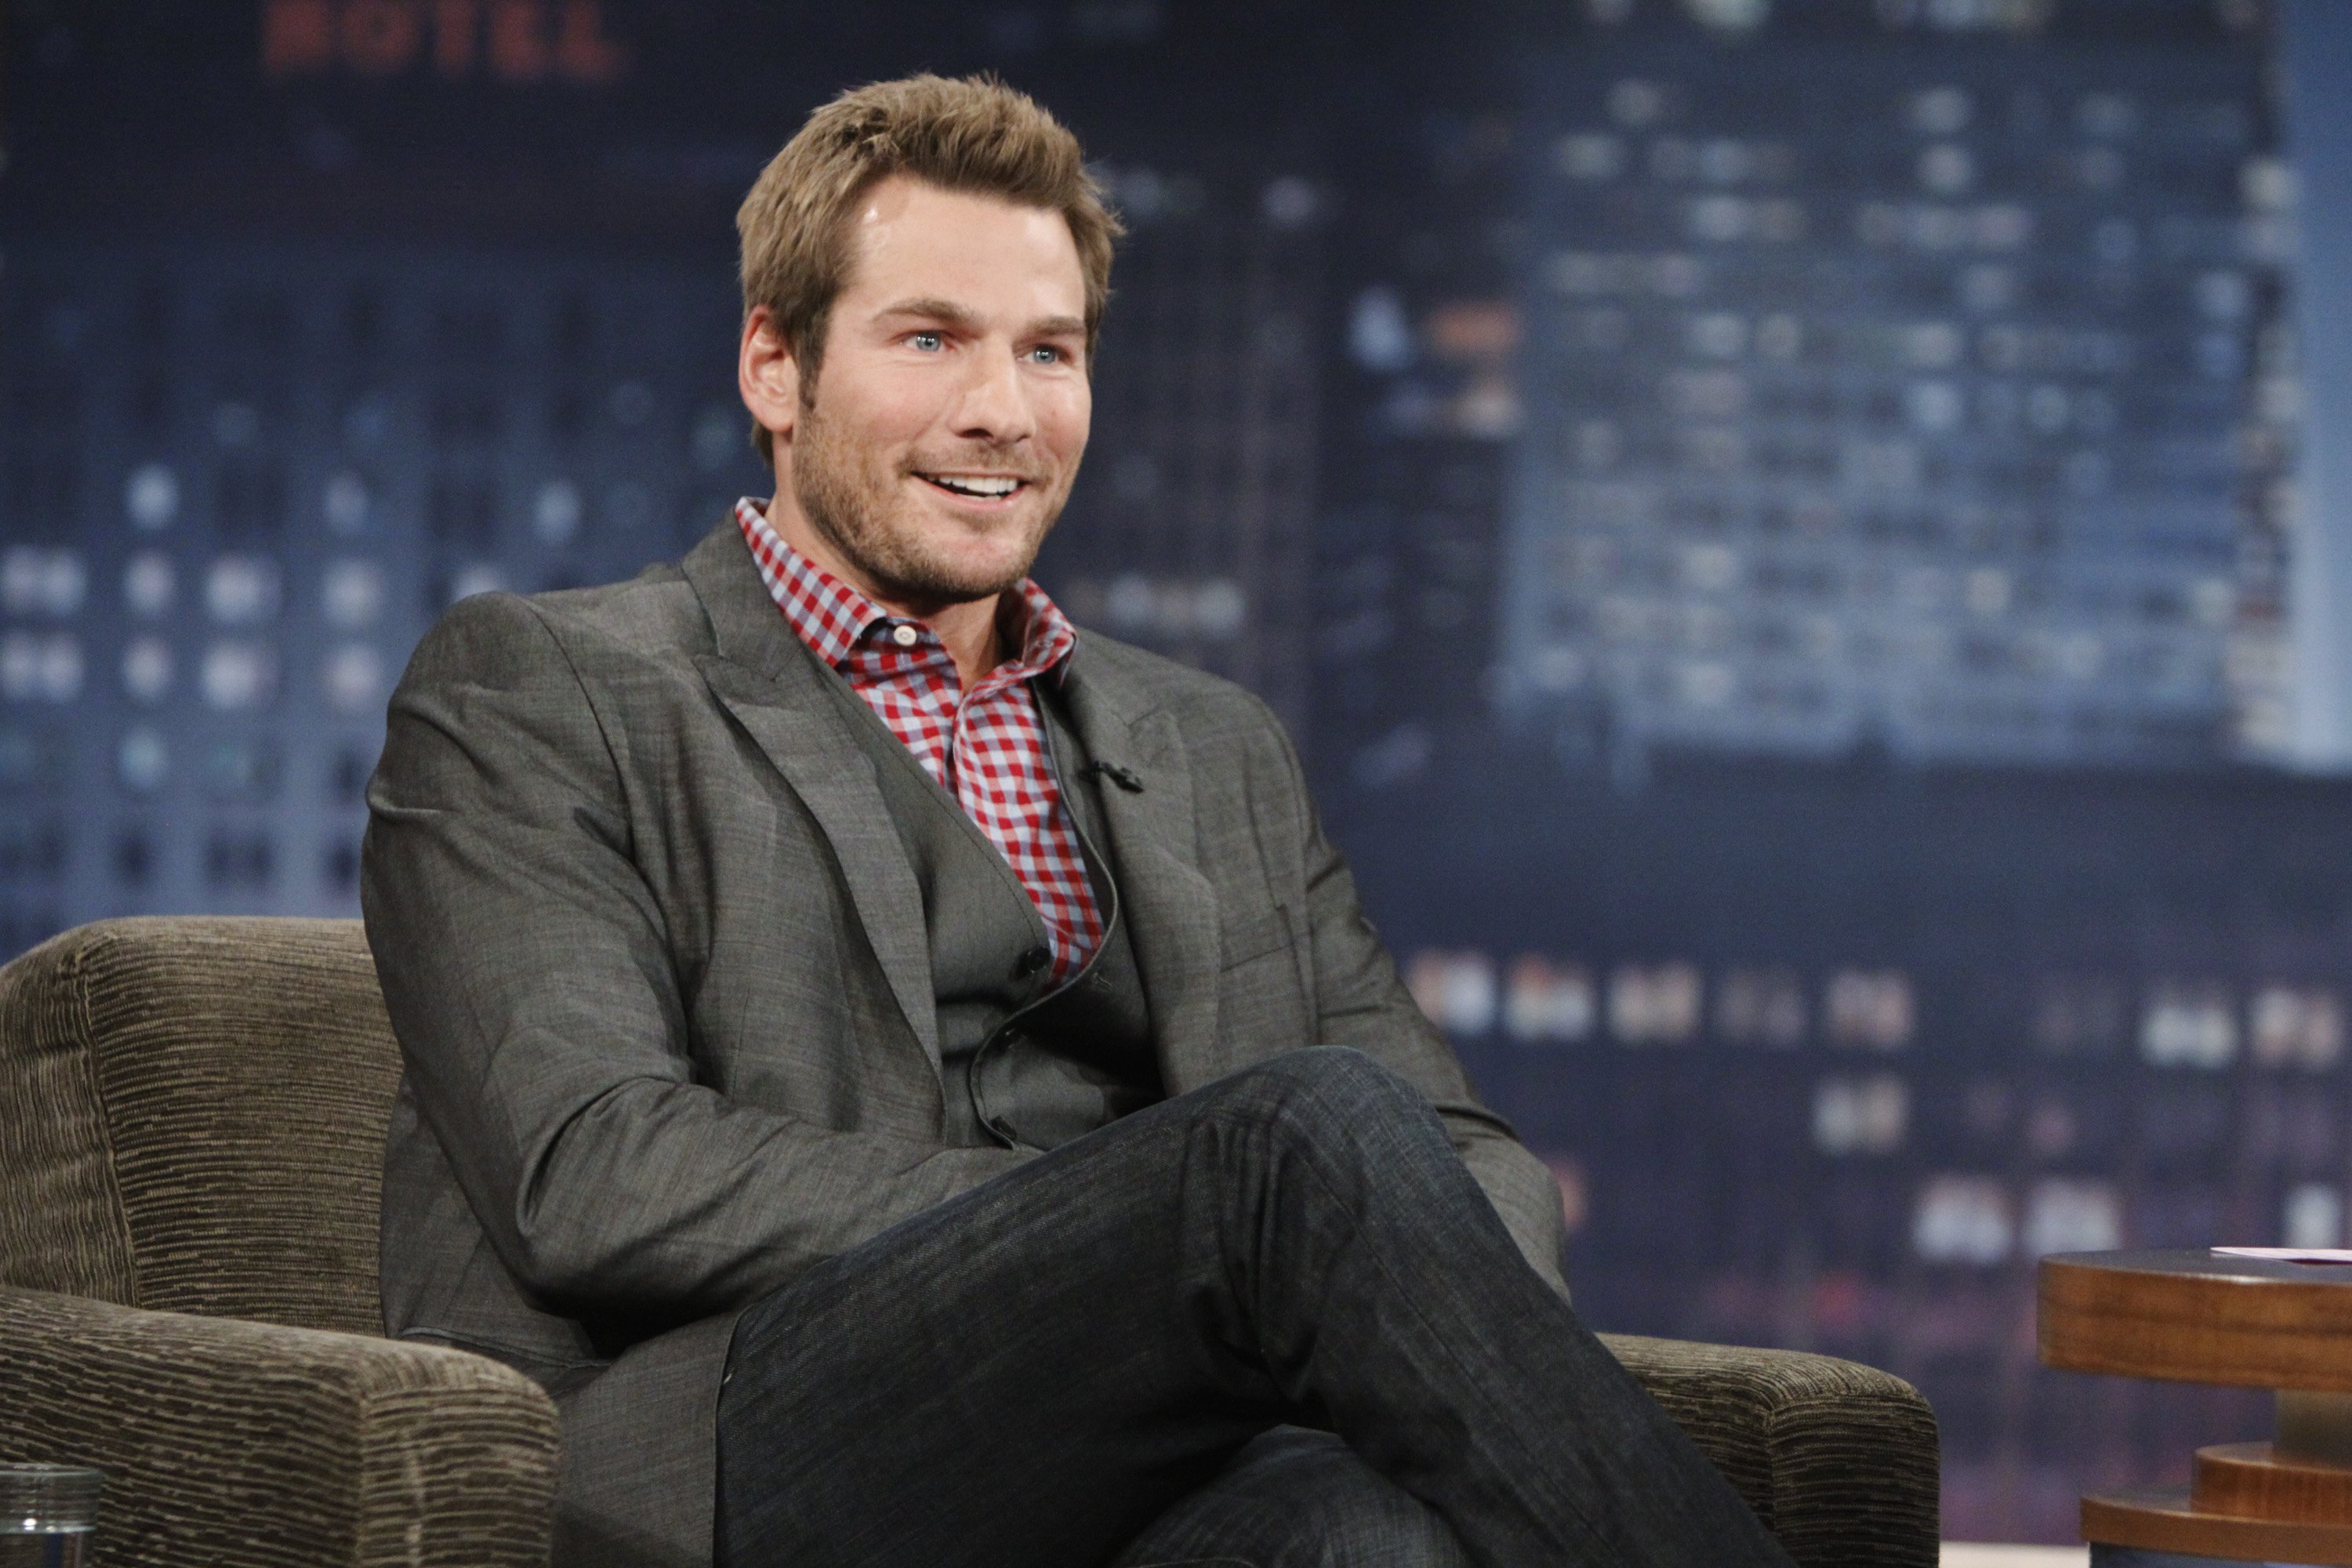 Brad Womack from "The Bachelor" at ABC's "Jimmy Kimmel Live" - Season Nine,  January 03, 2011 | Photo by Michael Desmond/Walt Disney Television via Getty Images